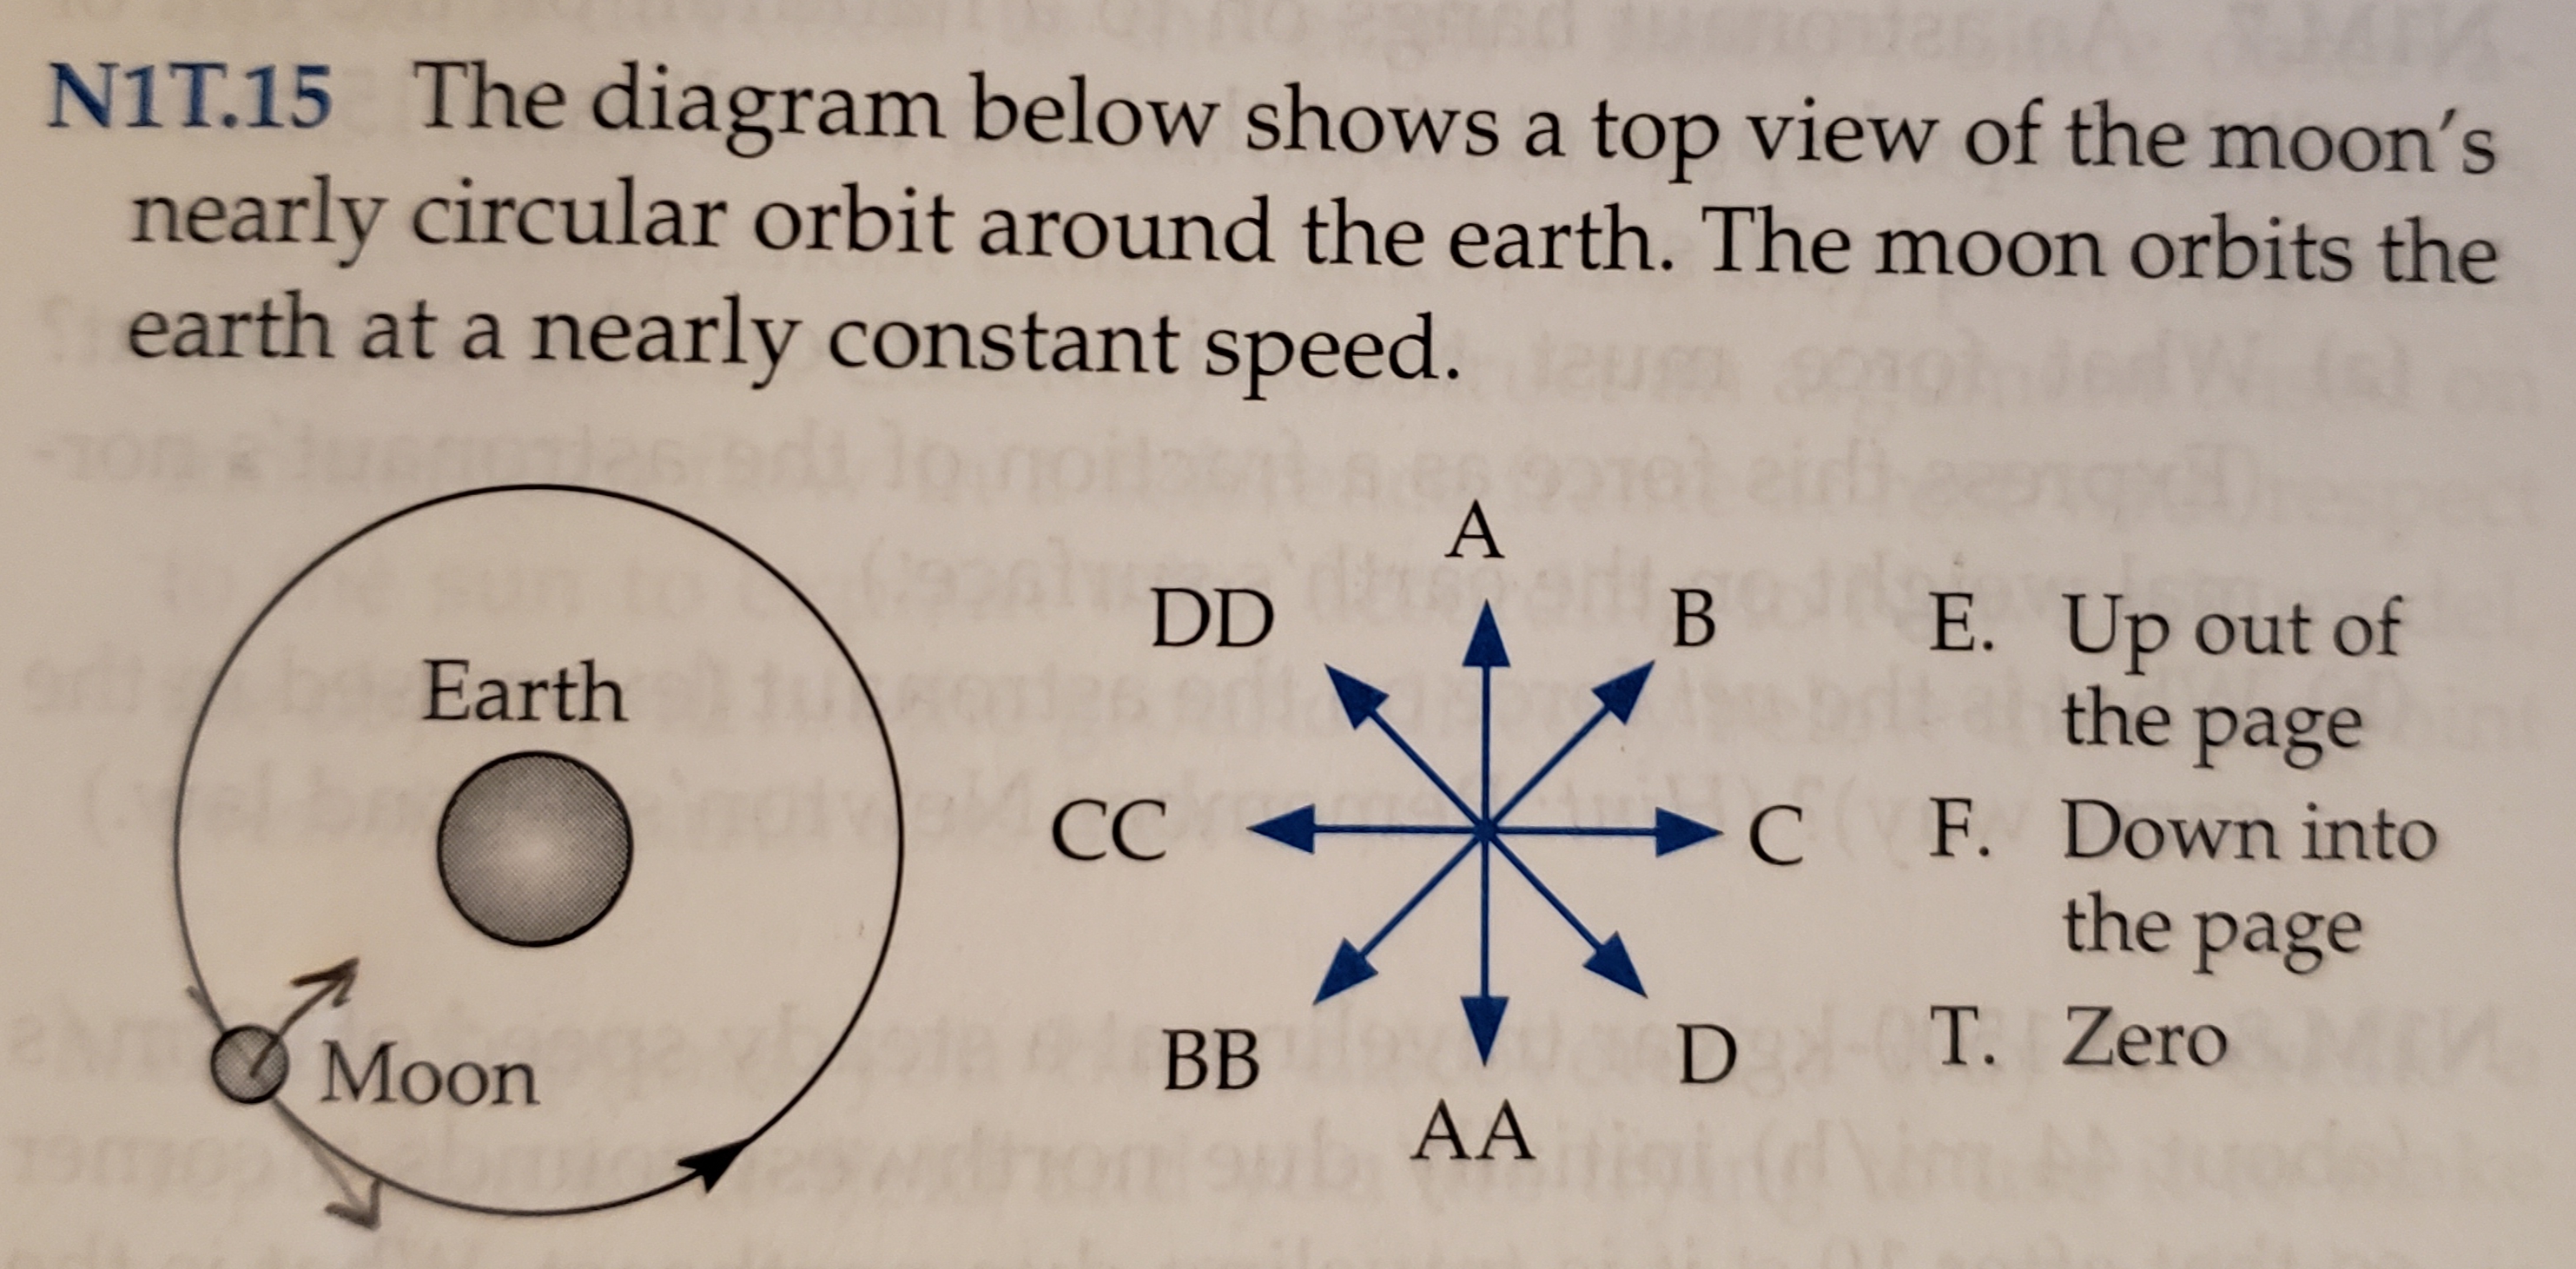 NIT.15 The diagram below shows a top view of the moon's
nearly circular orbit around the earth. The moon orbits the
earth at a nearly constant
speed.
A
DD
В
E. Up out of
the
Earth
page
C F. Down into
the page
ba
notoelCC
aN
T. Zero
D
ВB
Moon
AA
